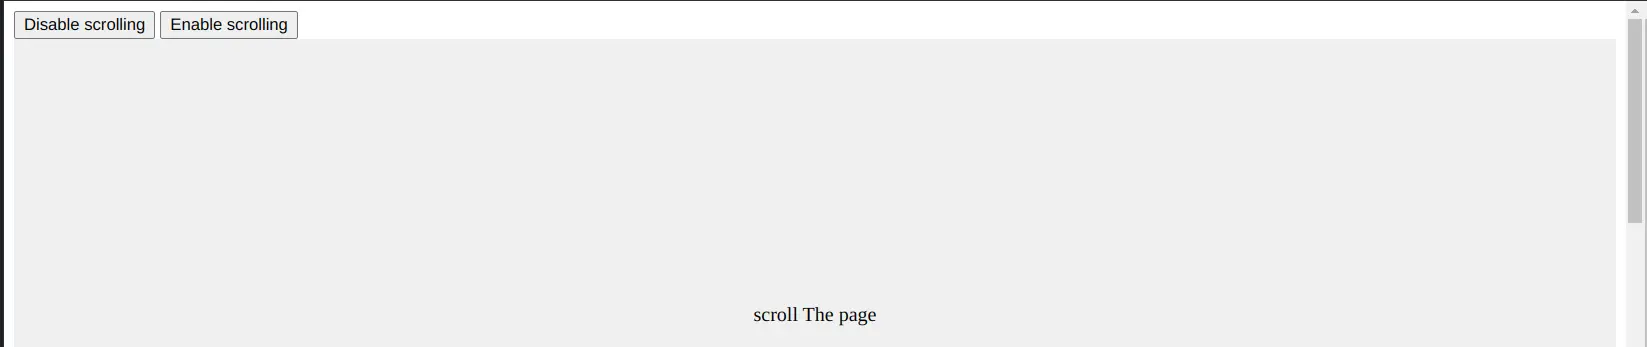 disable scrolling in javascript